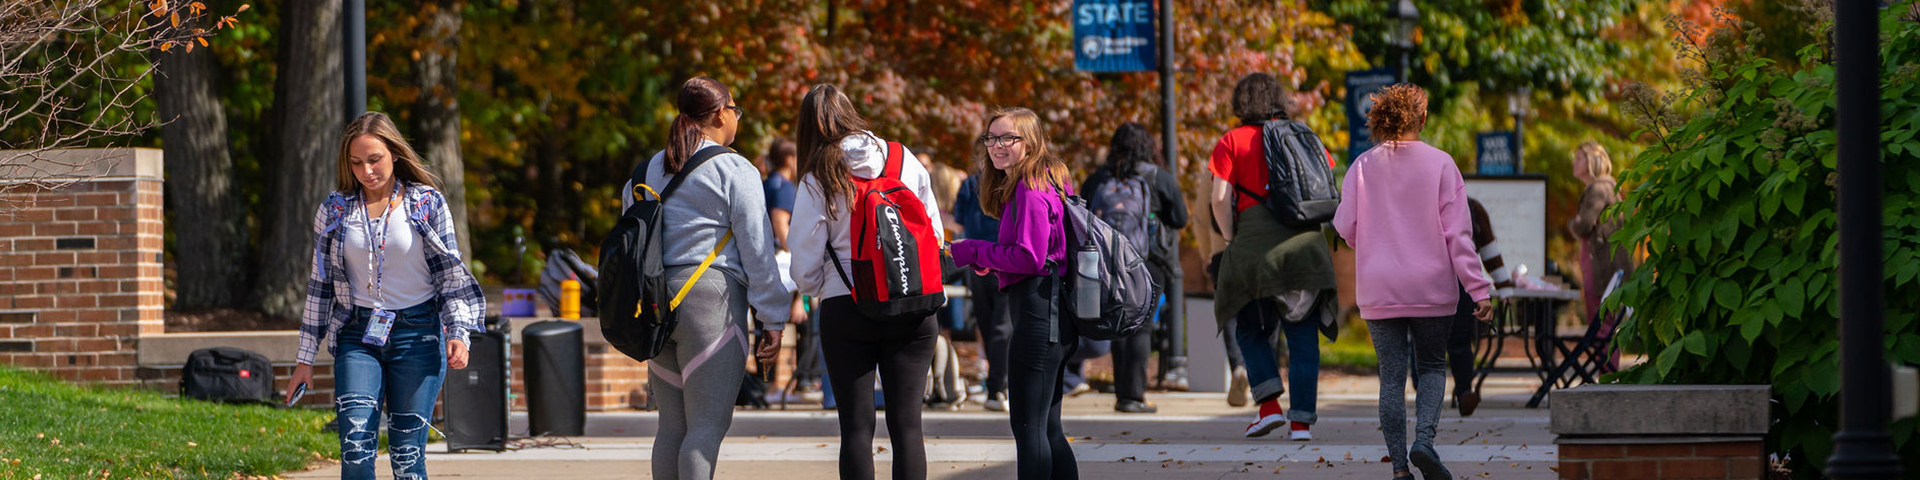 Students walking outdoors on a sidewalk at a college campus.